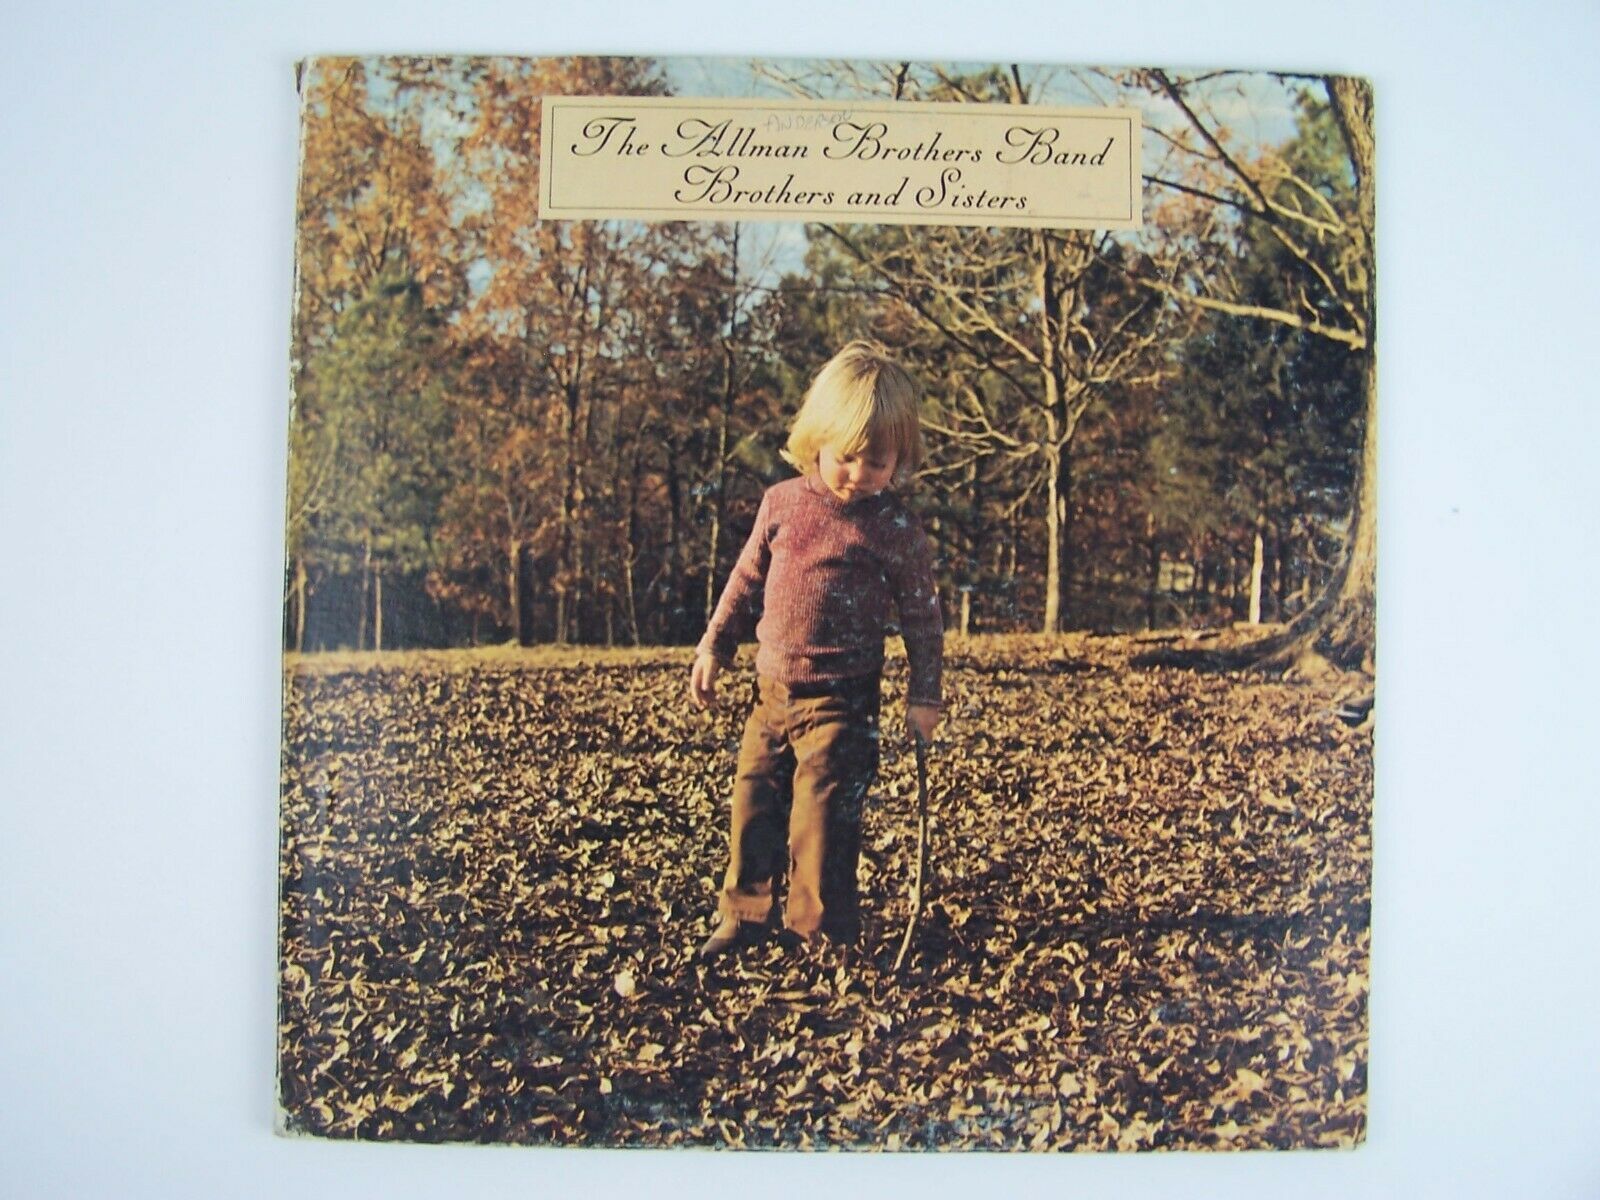 Primary image for The Allman Brothers Band – Brothers And Sisters Vinyl LP Record Album CP-0111